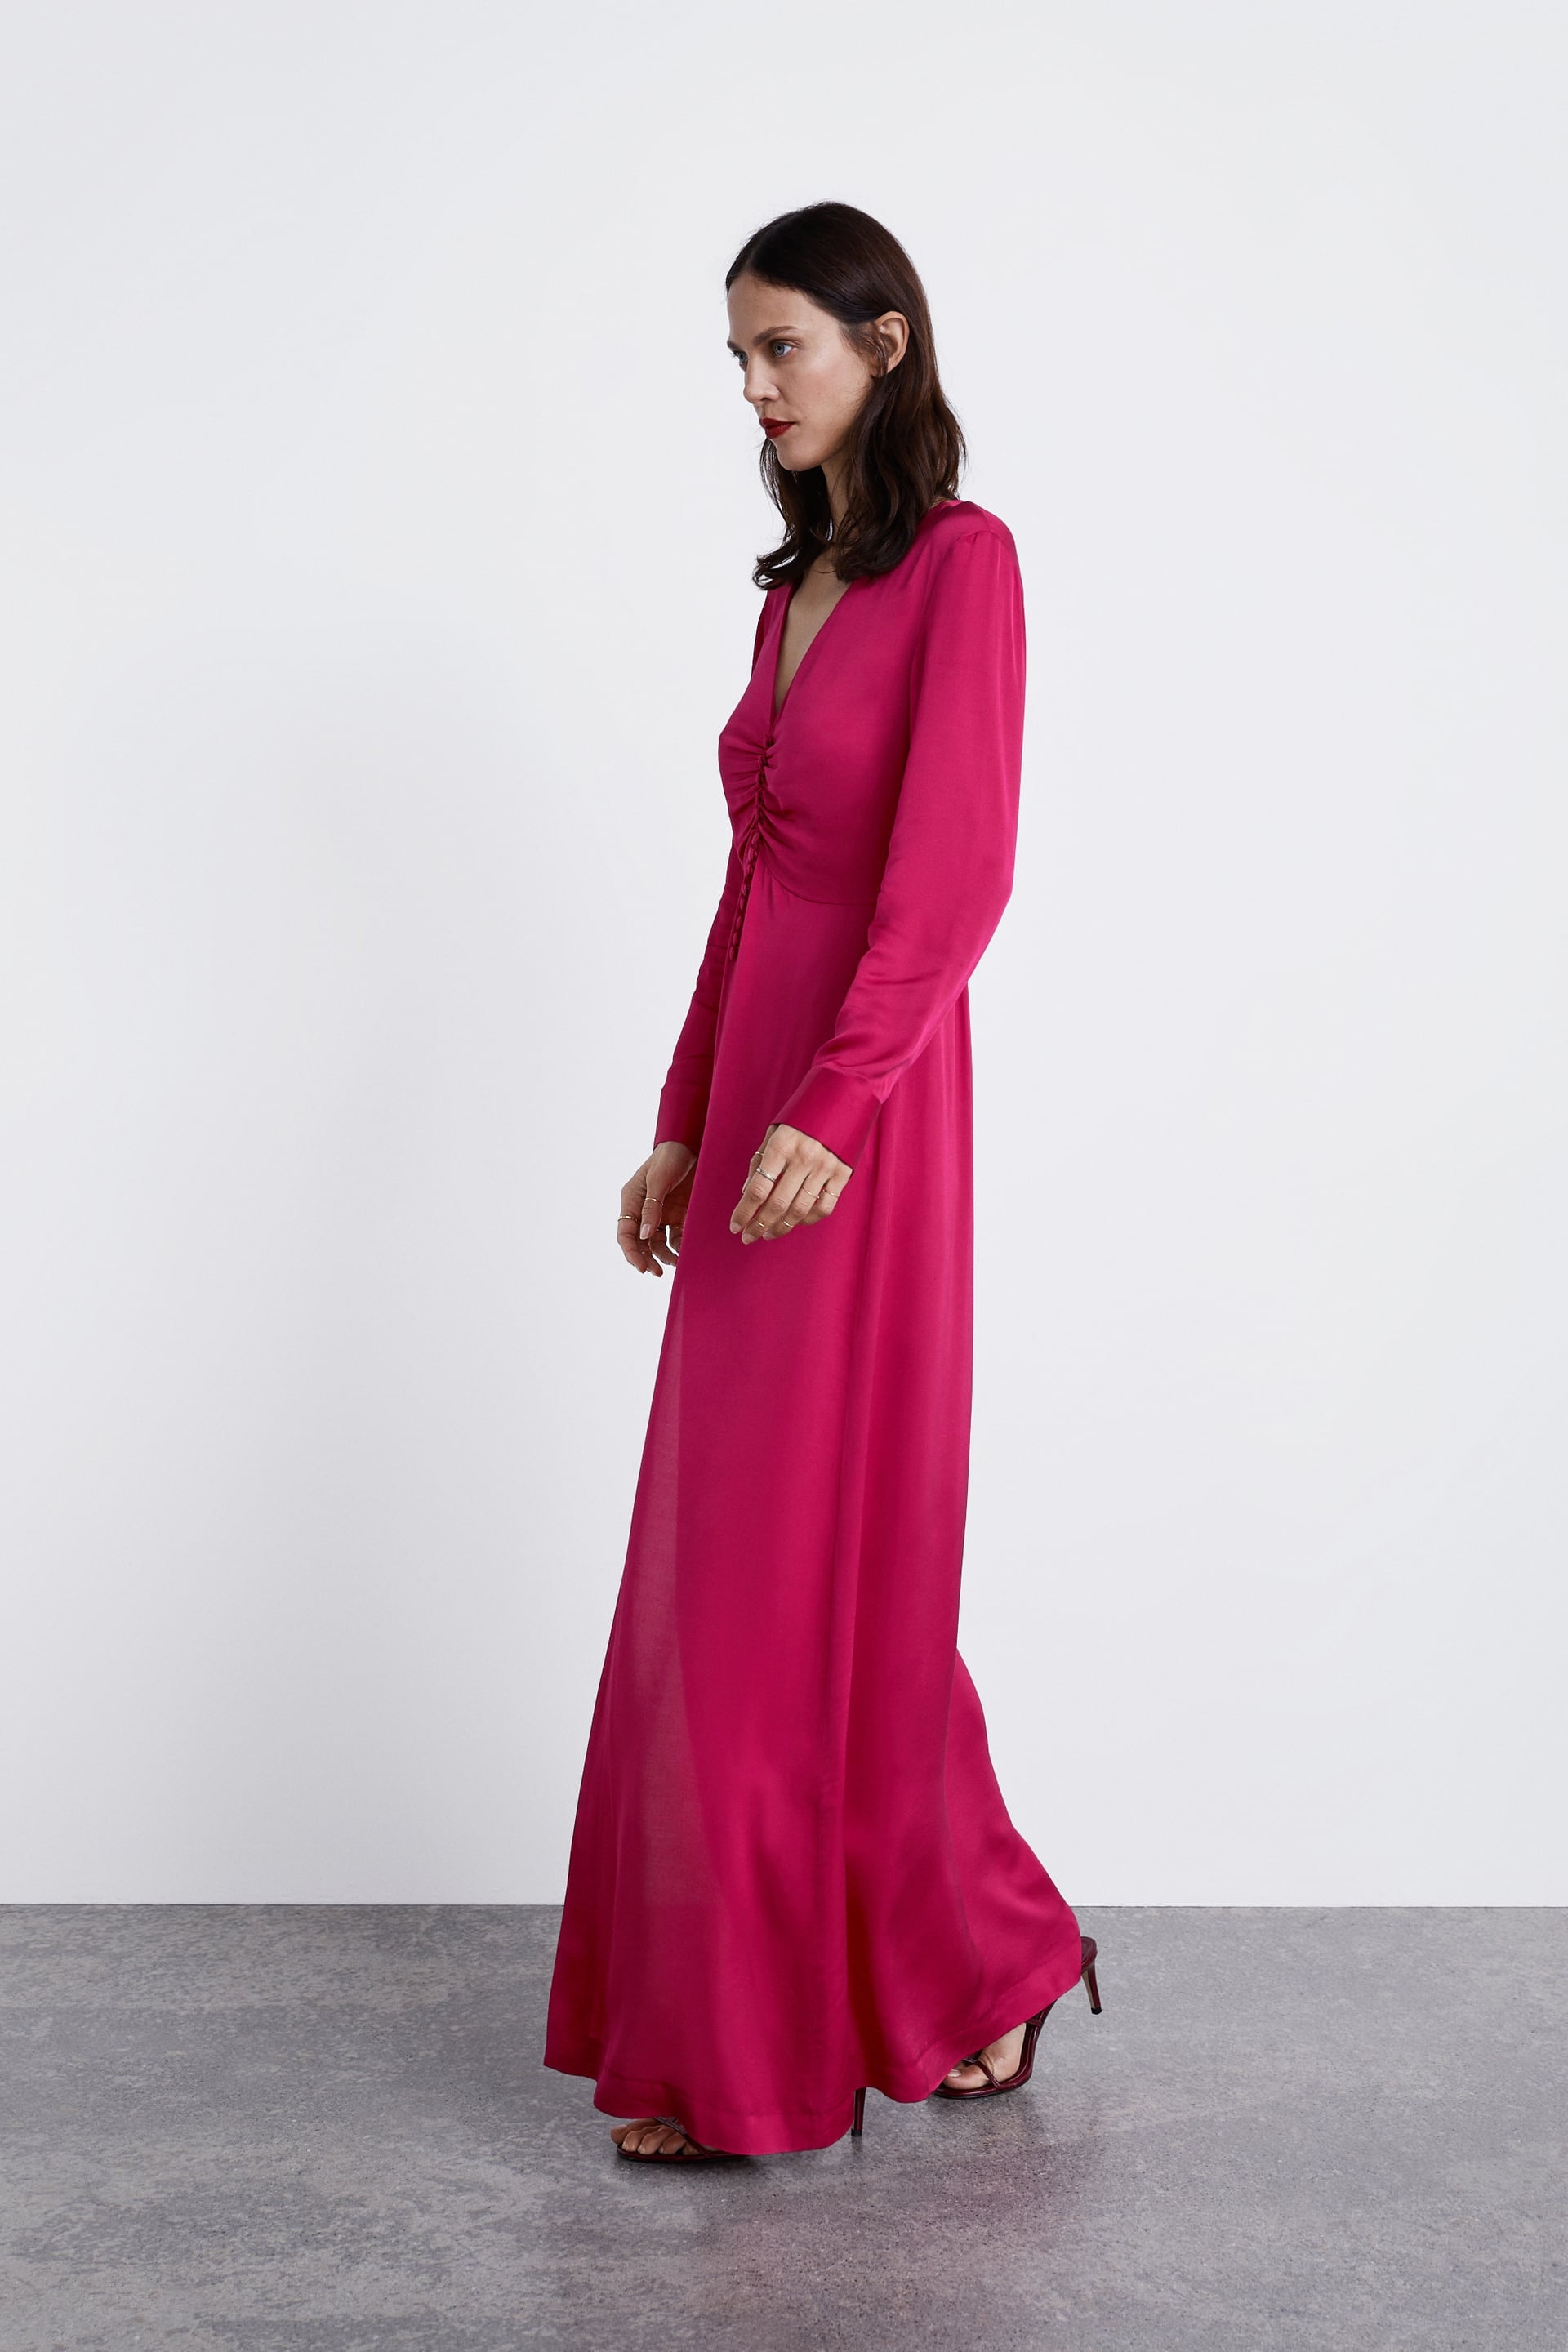 pink and red dress zara